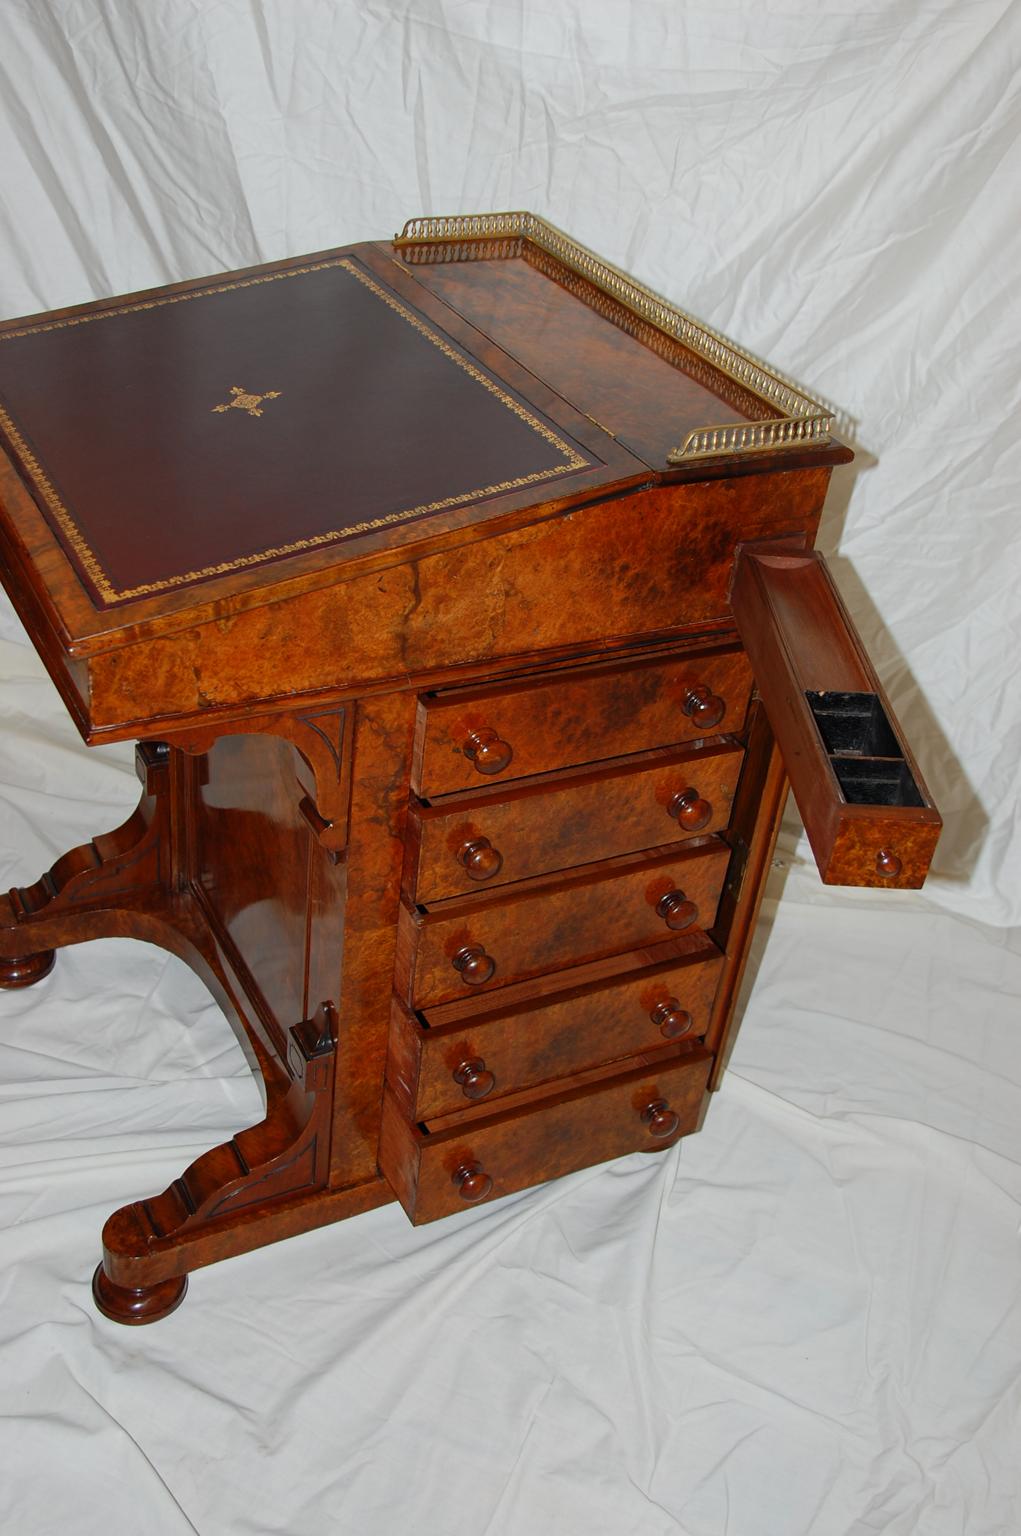 Victorian English Mid-19th Century Burl Walnut Davenport Desk with Leathered Writing Slope For Sale